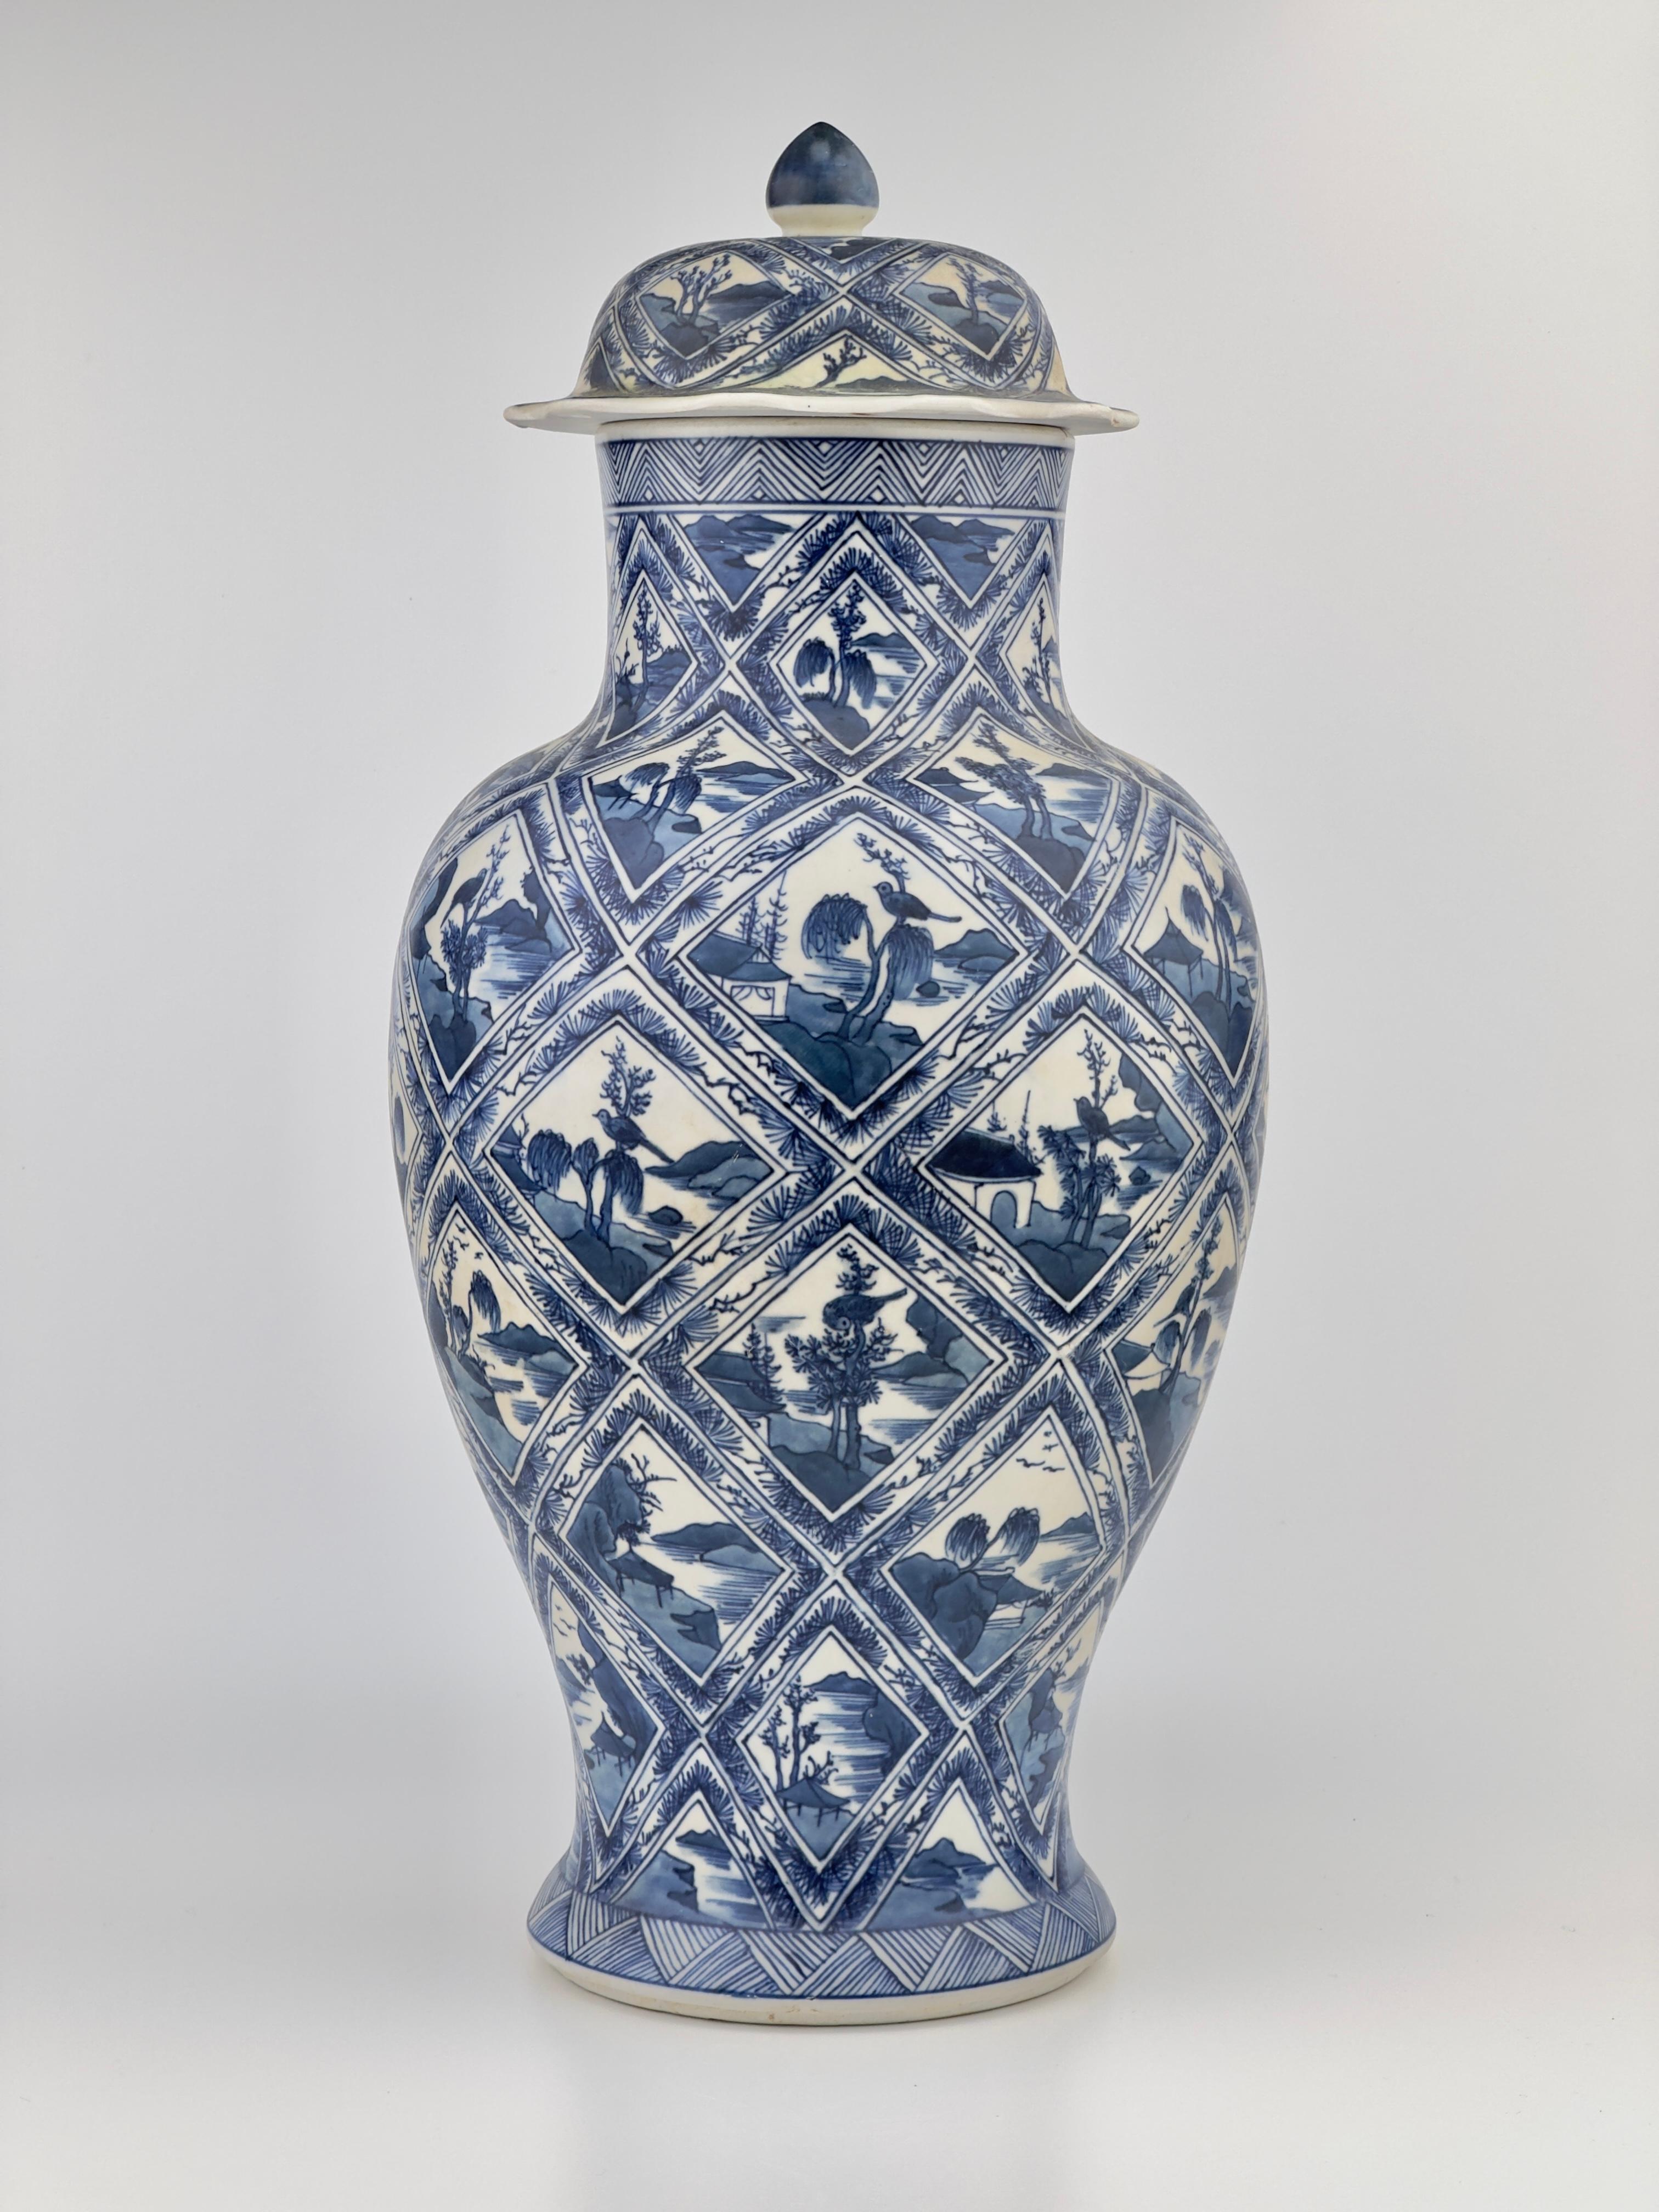 Large rare vase painted with petal-shaped panels of riverscapes pattern.

Period : Qing Dynasty, Kangxi Period
Production Date : 1690-1699
Made in : Jingdezhen
Destination : Netherland
Found/Acquired : Southeast Asia , South China Sea, Vung Tau